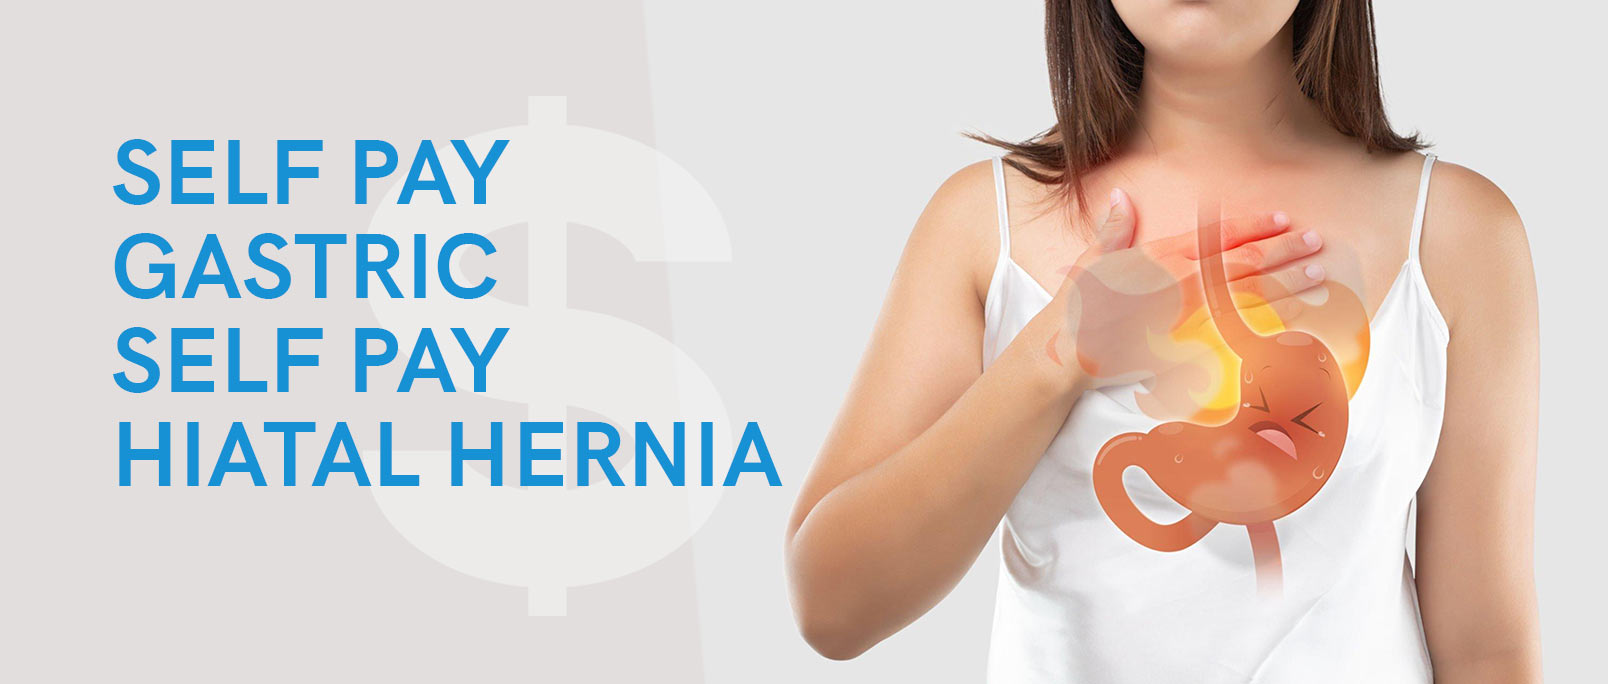 Affordable Self-Pay Hiatal Hernia and Reflux Treatment in Jacksonville, FL